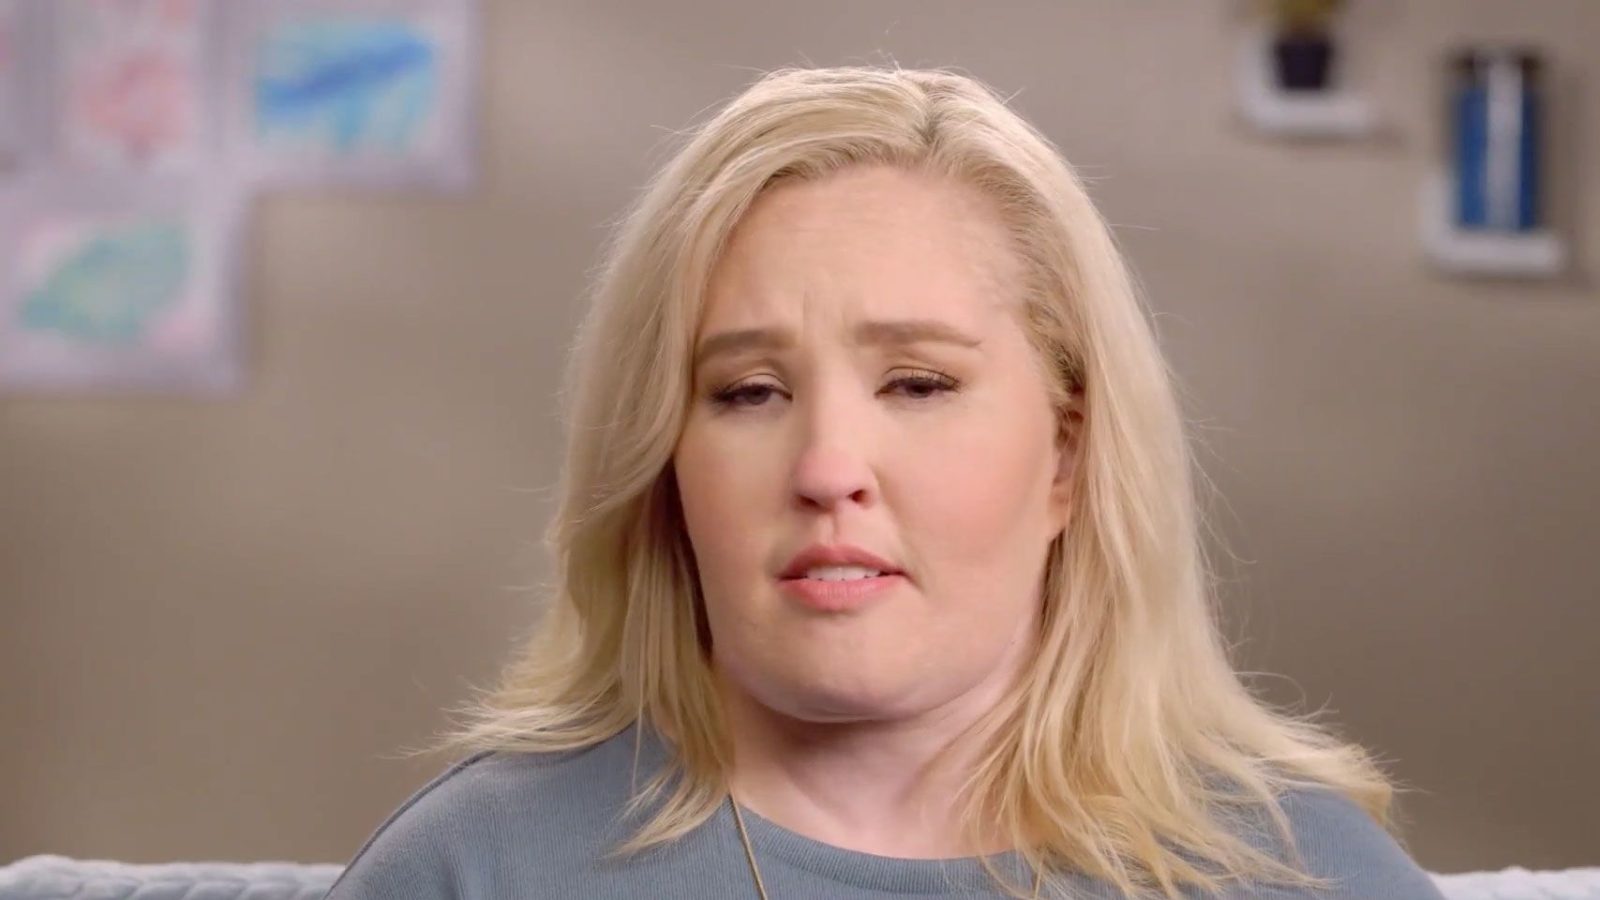 is mama june married?